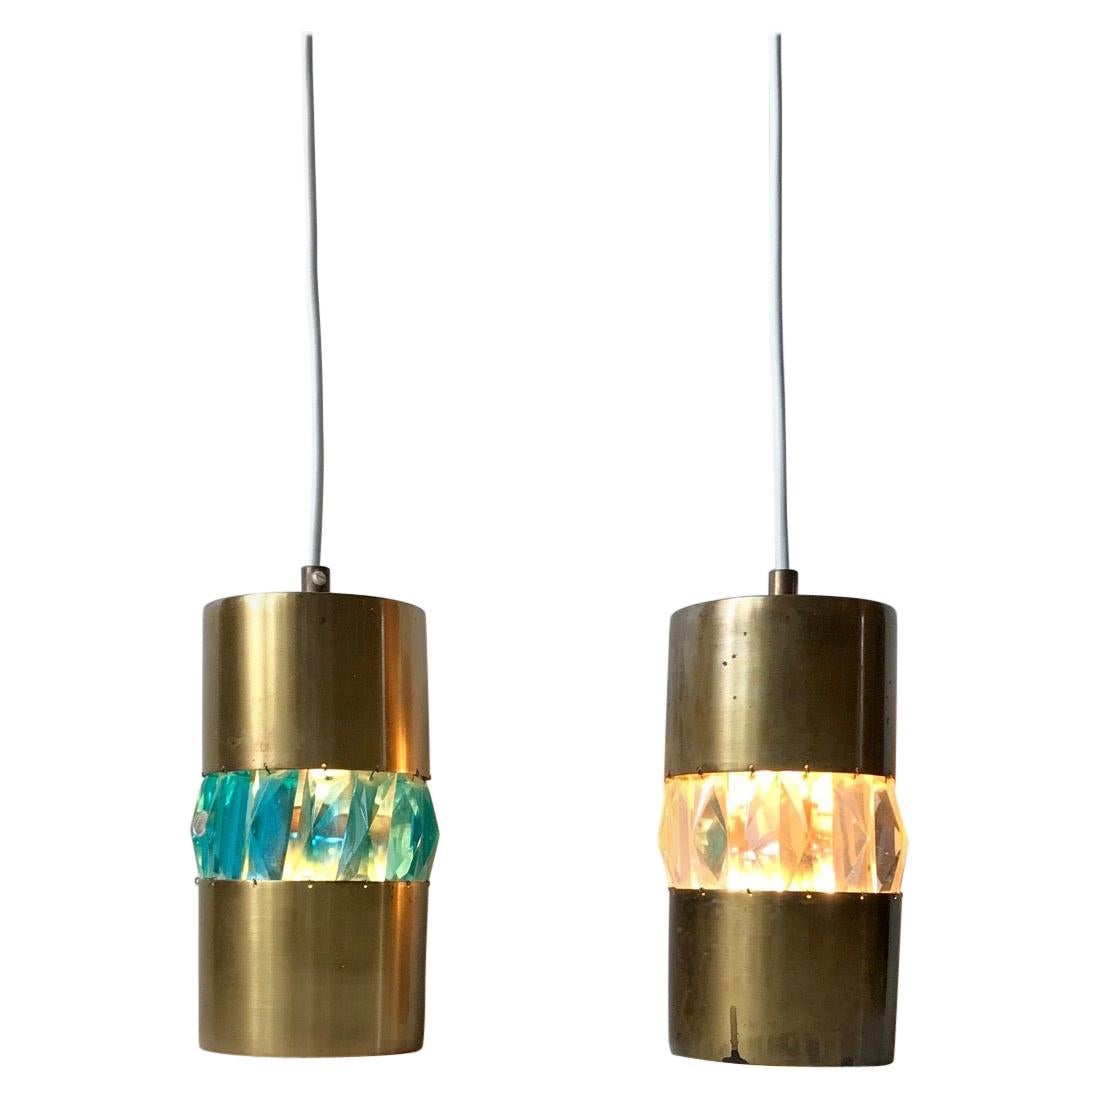 Midcentury Brass Pendant Lamps with Bohemian Crystal Prisms, 1960s For Sale